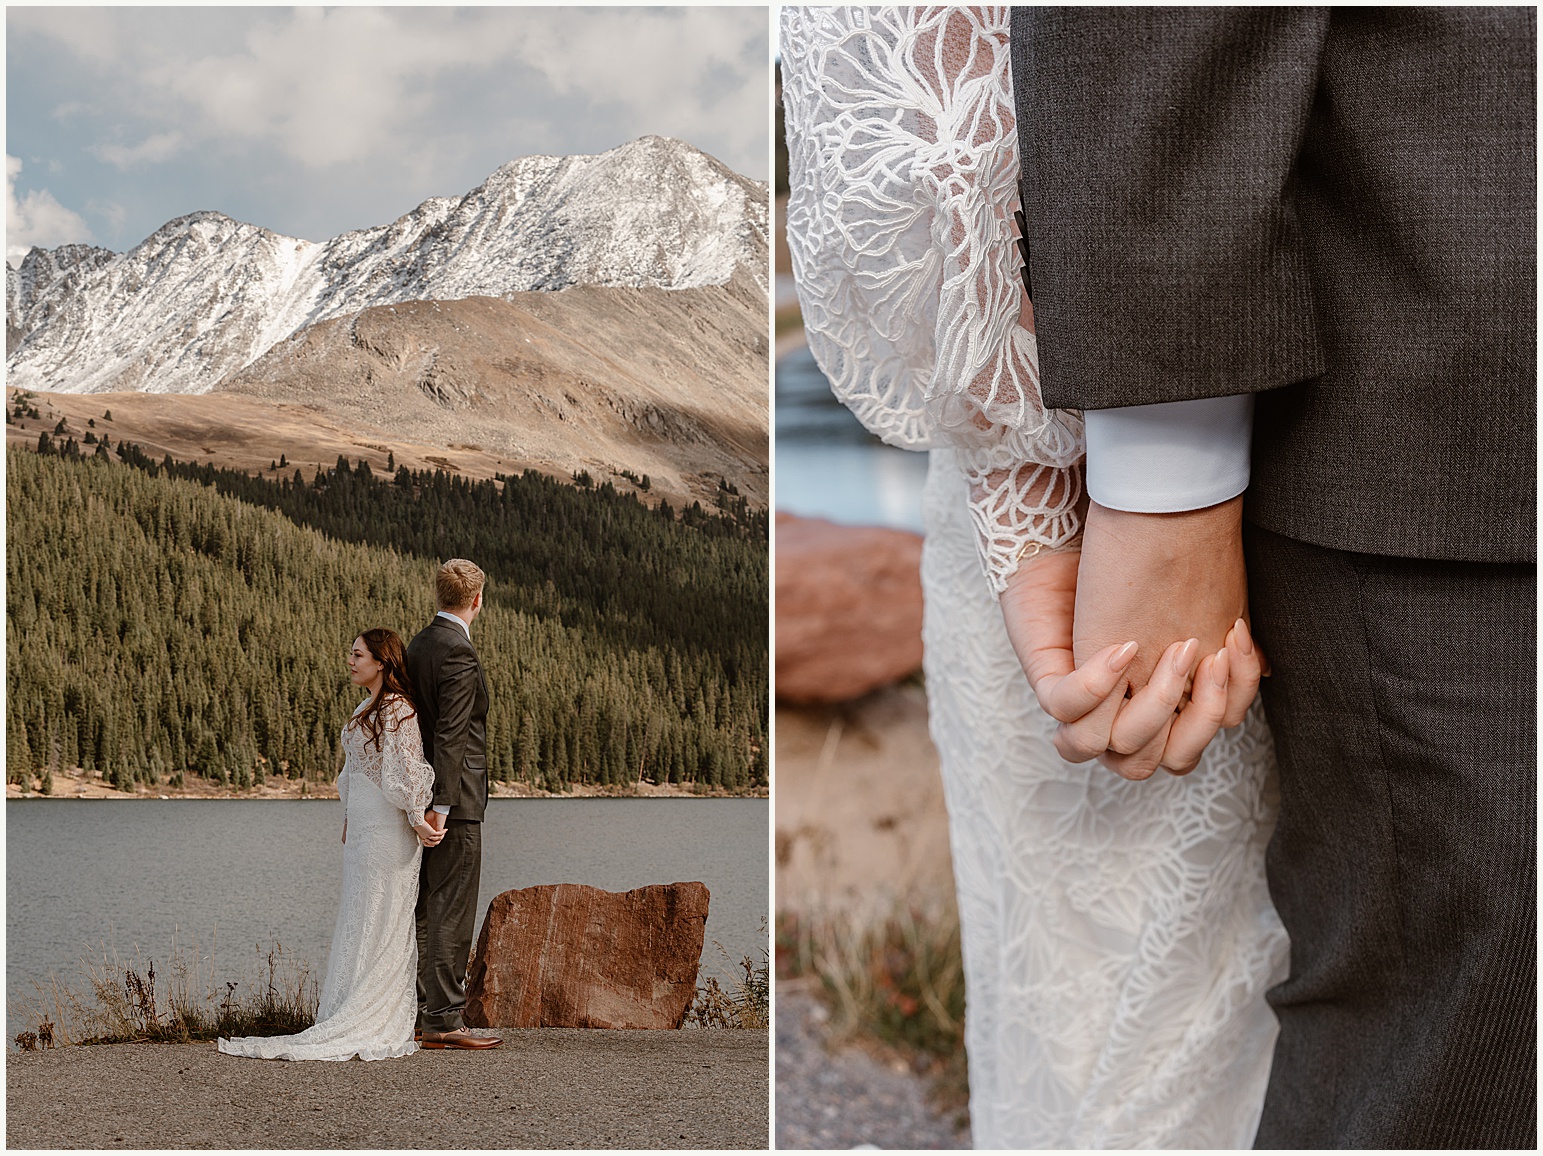 A bride and groom hold hands during their first touch–taking moment to be present, mindful, and intentional on their Colorado adventure elopement day.